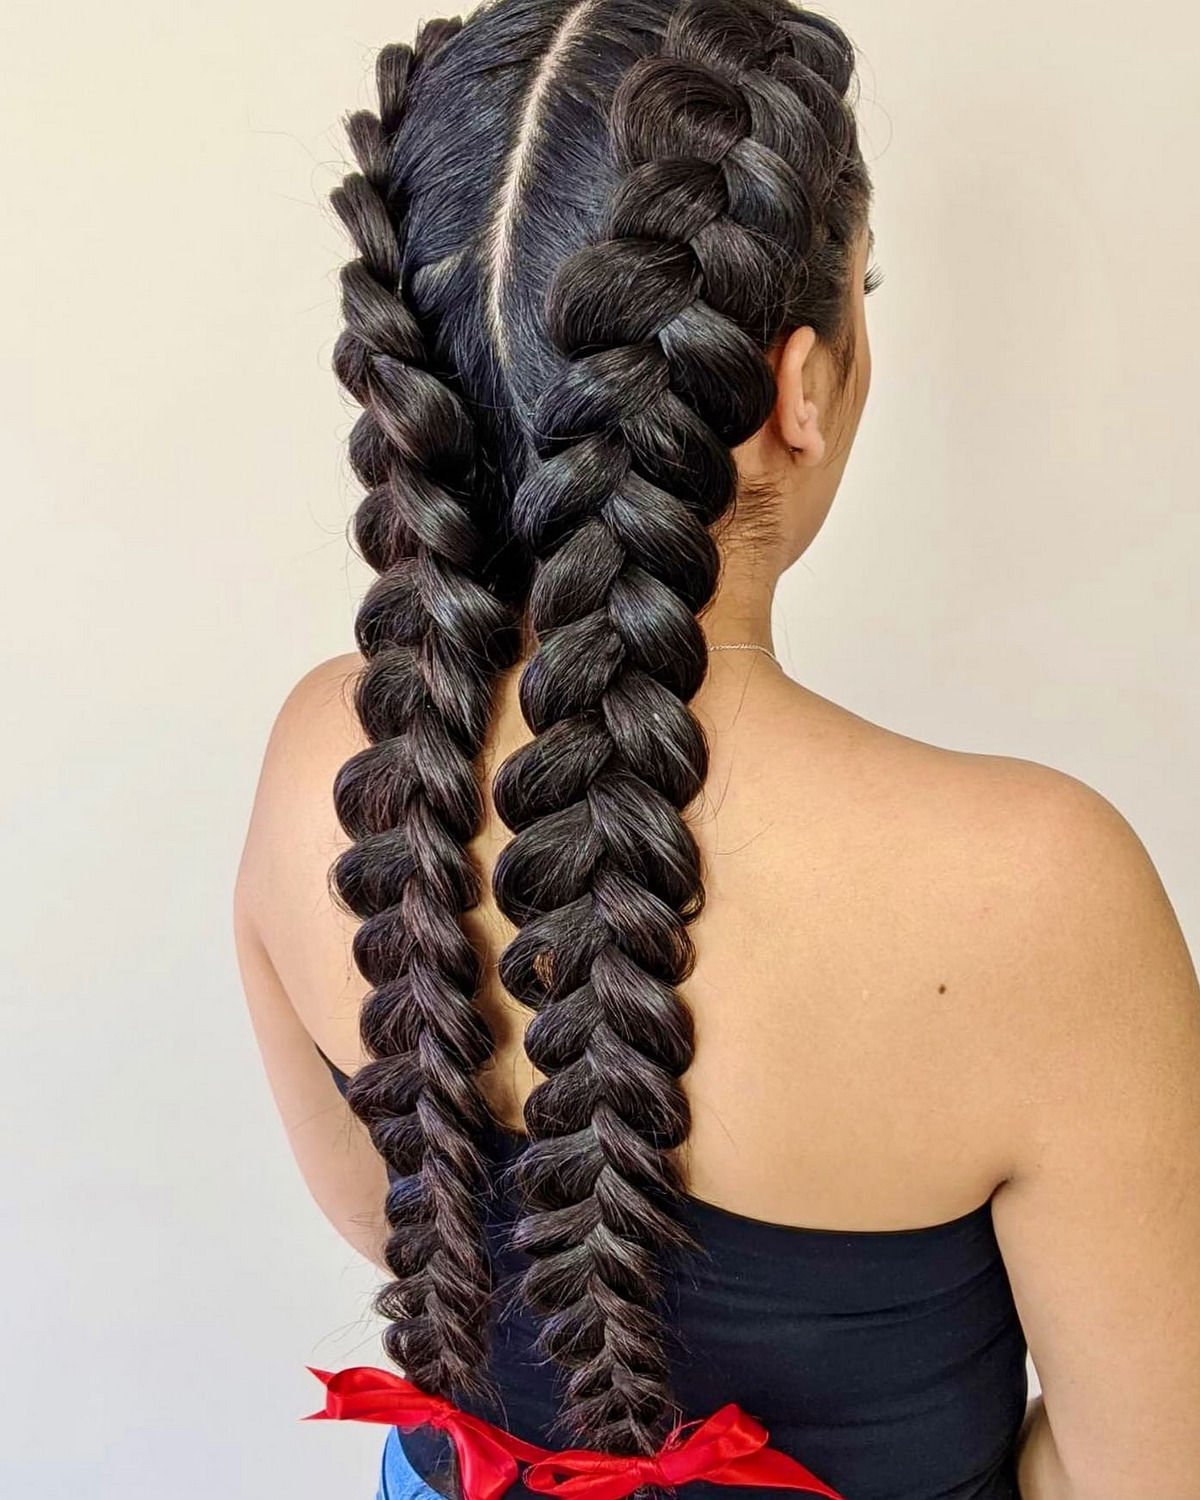 10 Mexican Braids Hairstyles Trending in 2023